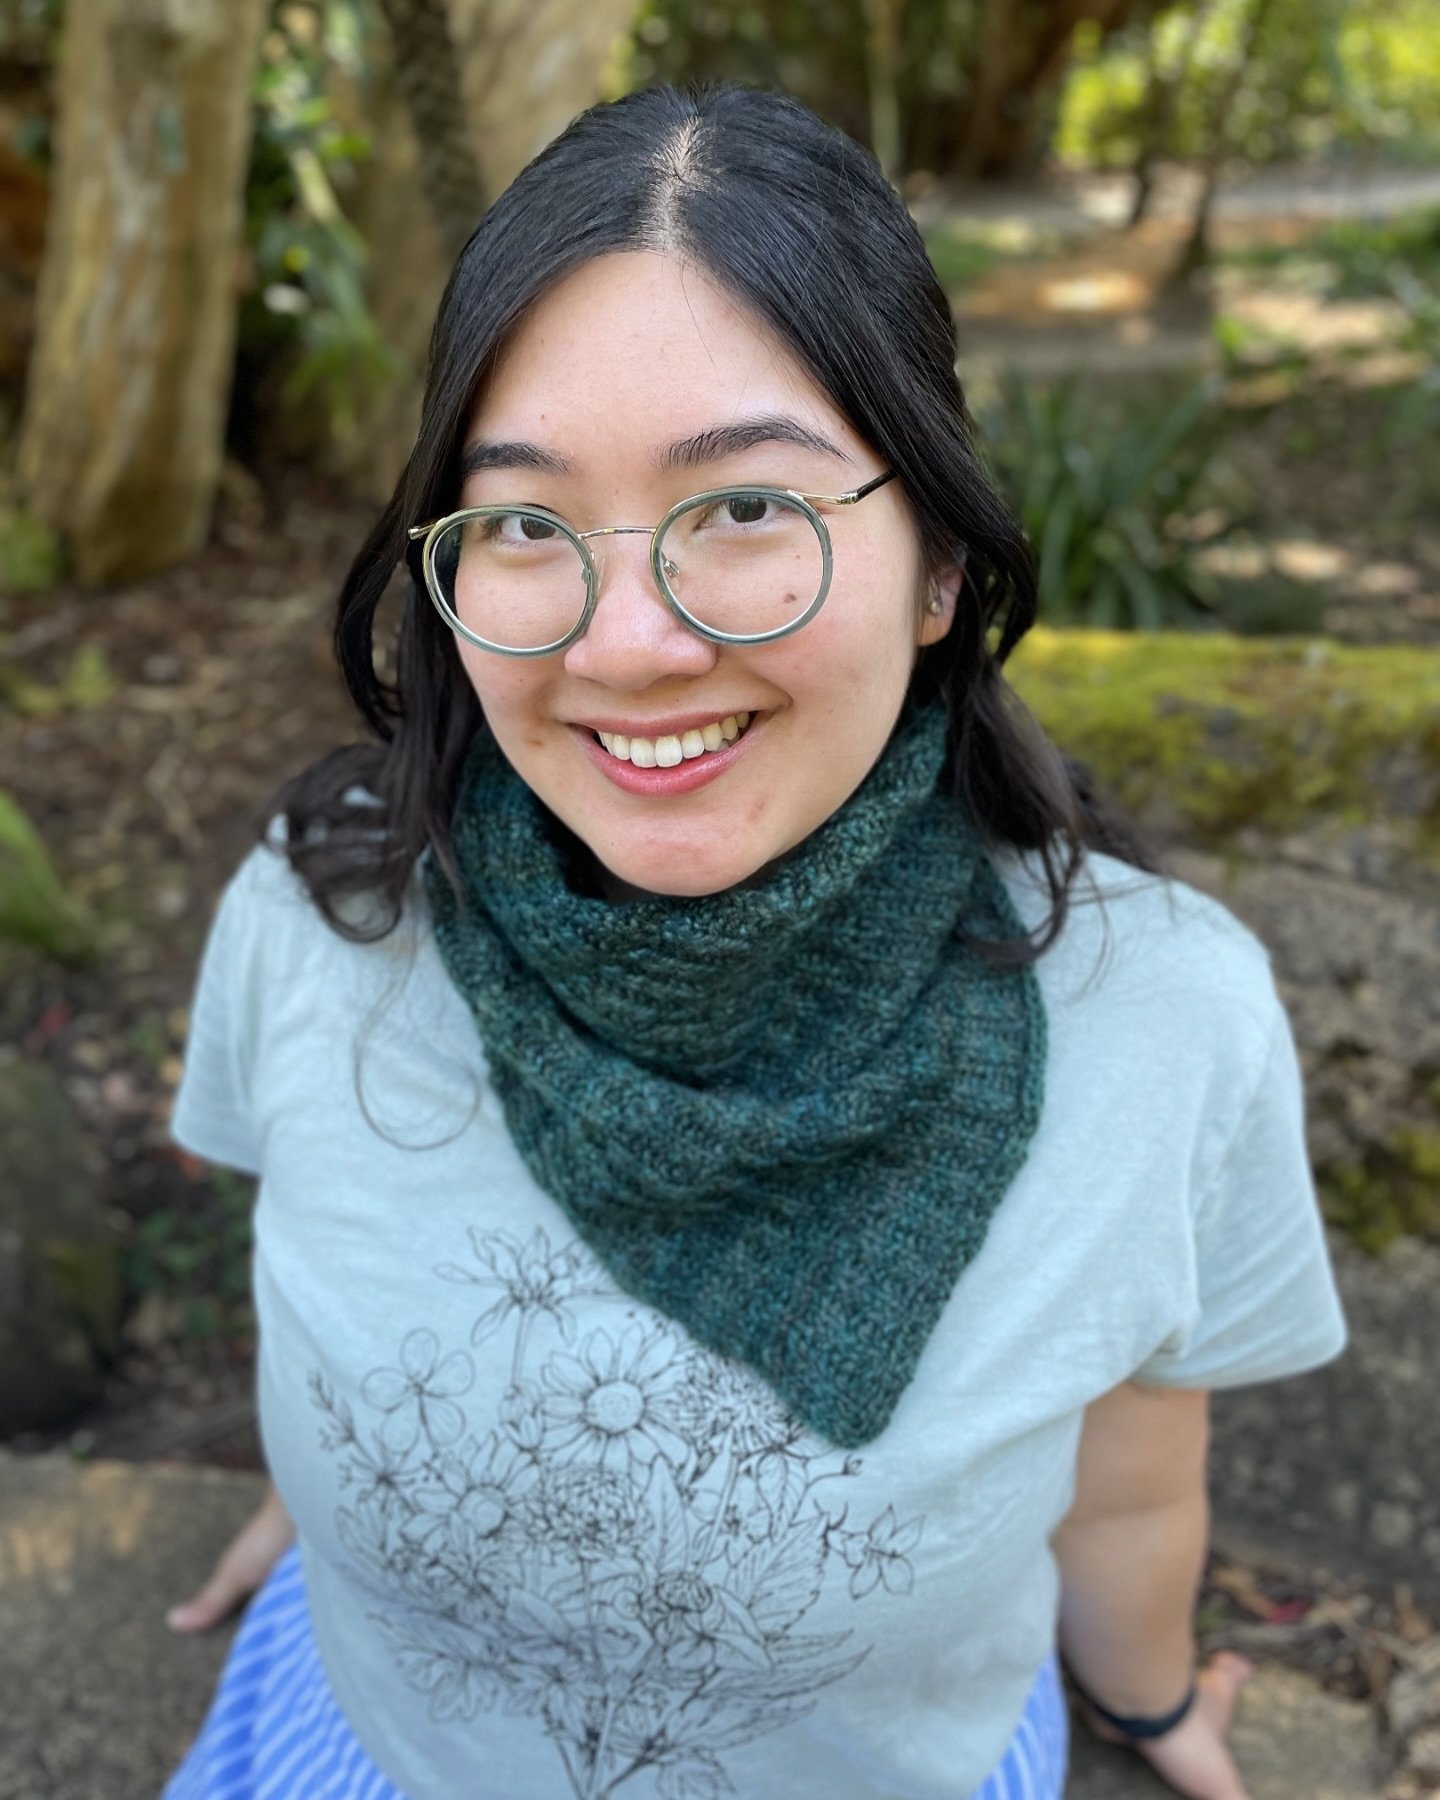 #BriocheBiasCowl handspun version!

Are you local to the Seattle area? Go to @shoplamercerie to get your own FREE copy as part of the #PugetSoundLYSTour2024! Not local? Stay tuned for a fun update on Monday!

I&rsquo;ve posted beauty shots a couple t